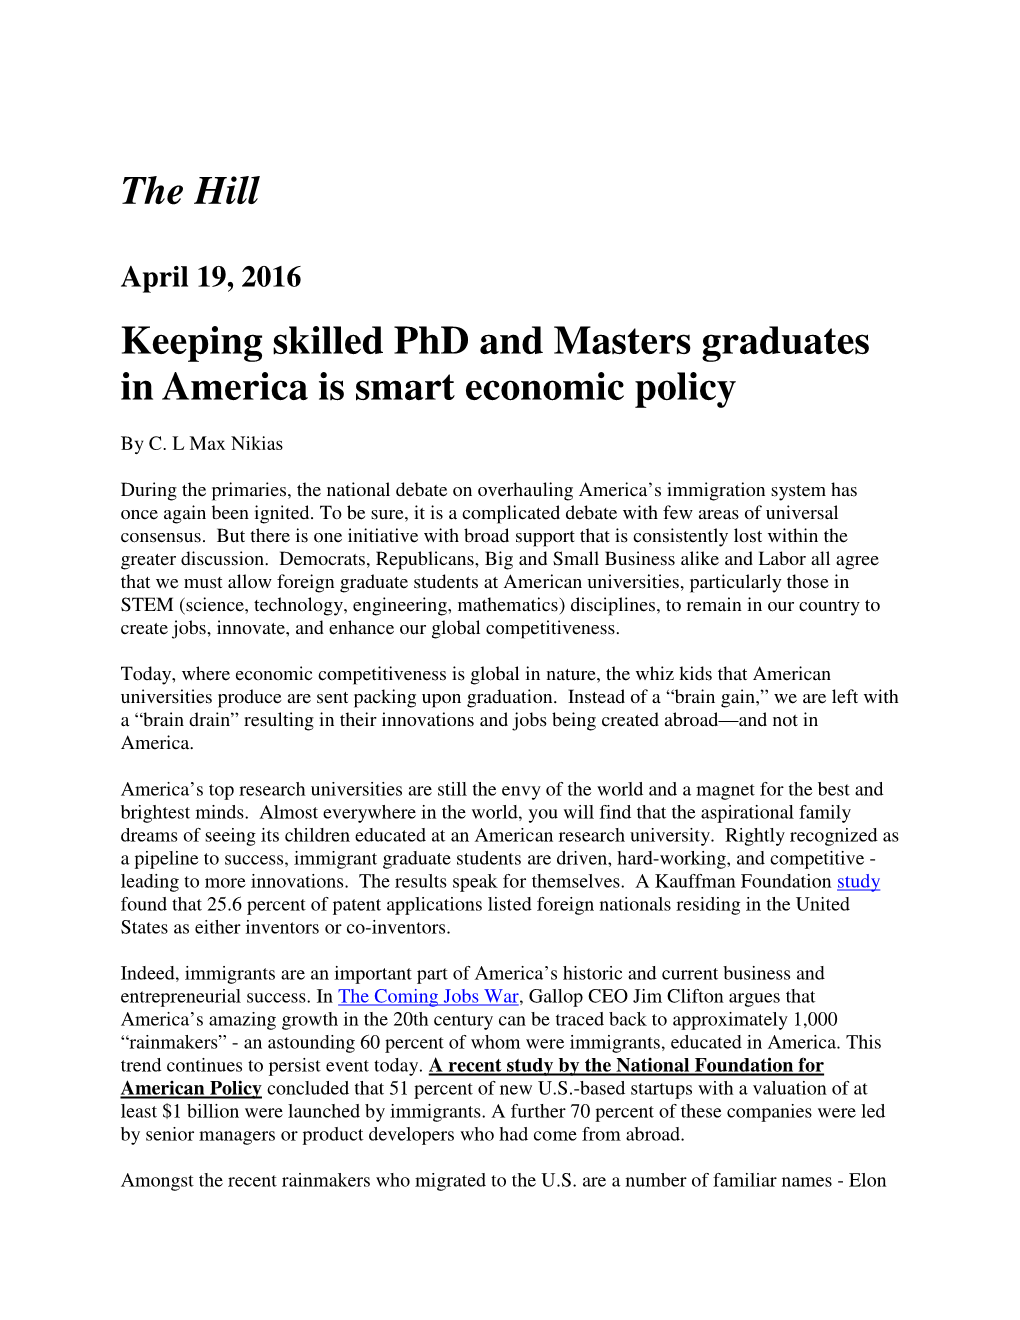 The Hill Keeping Skilled Phd and Masters Graduates in America Is